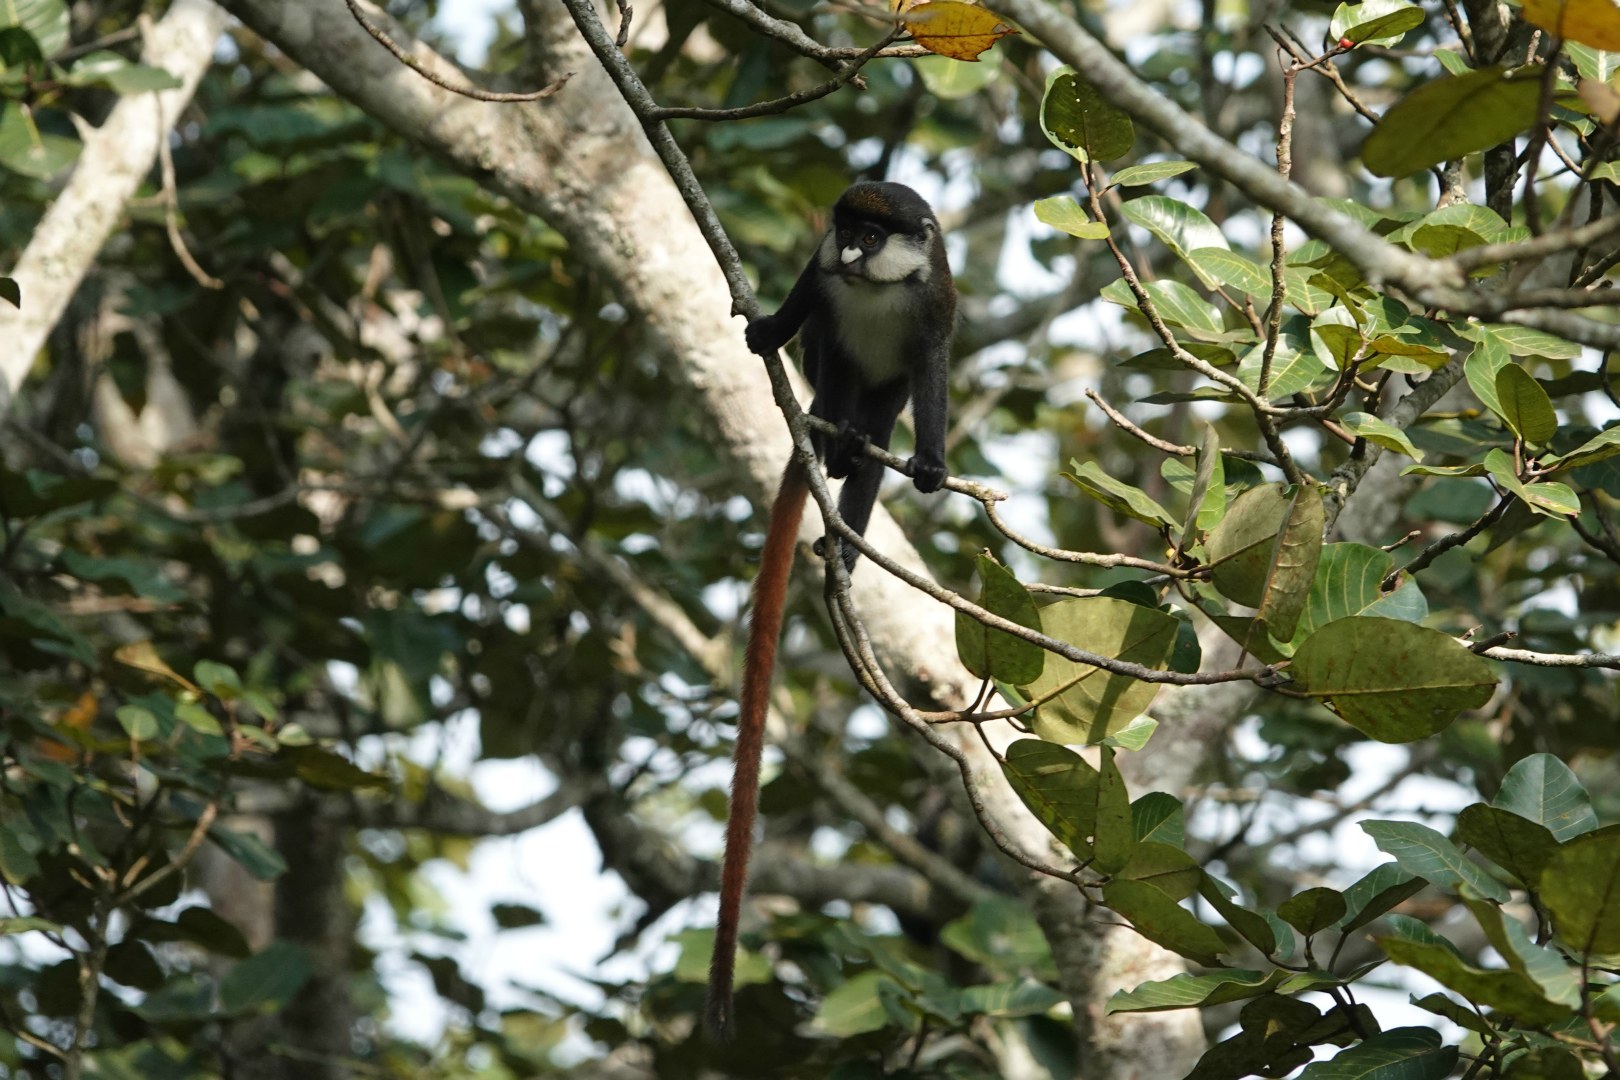 Red-tailed Monkey, Kibale National Park